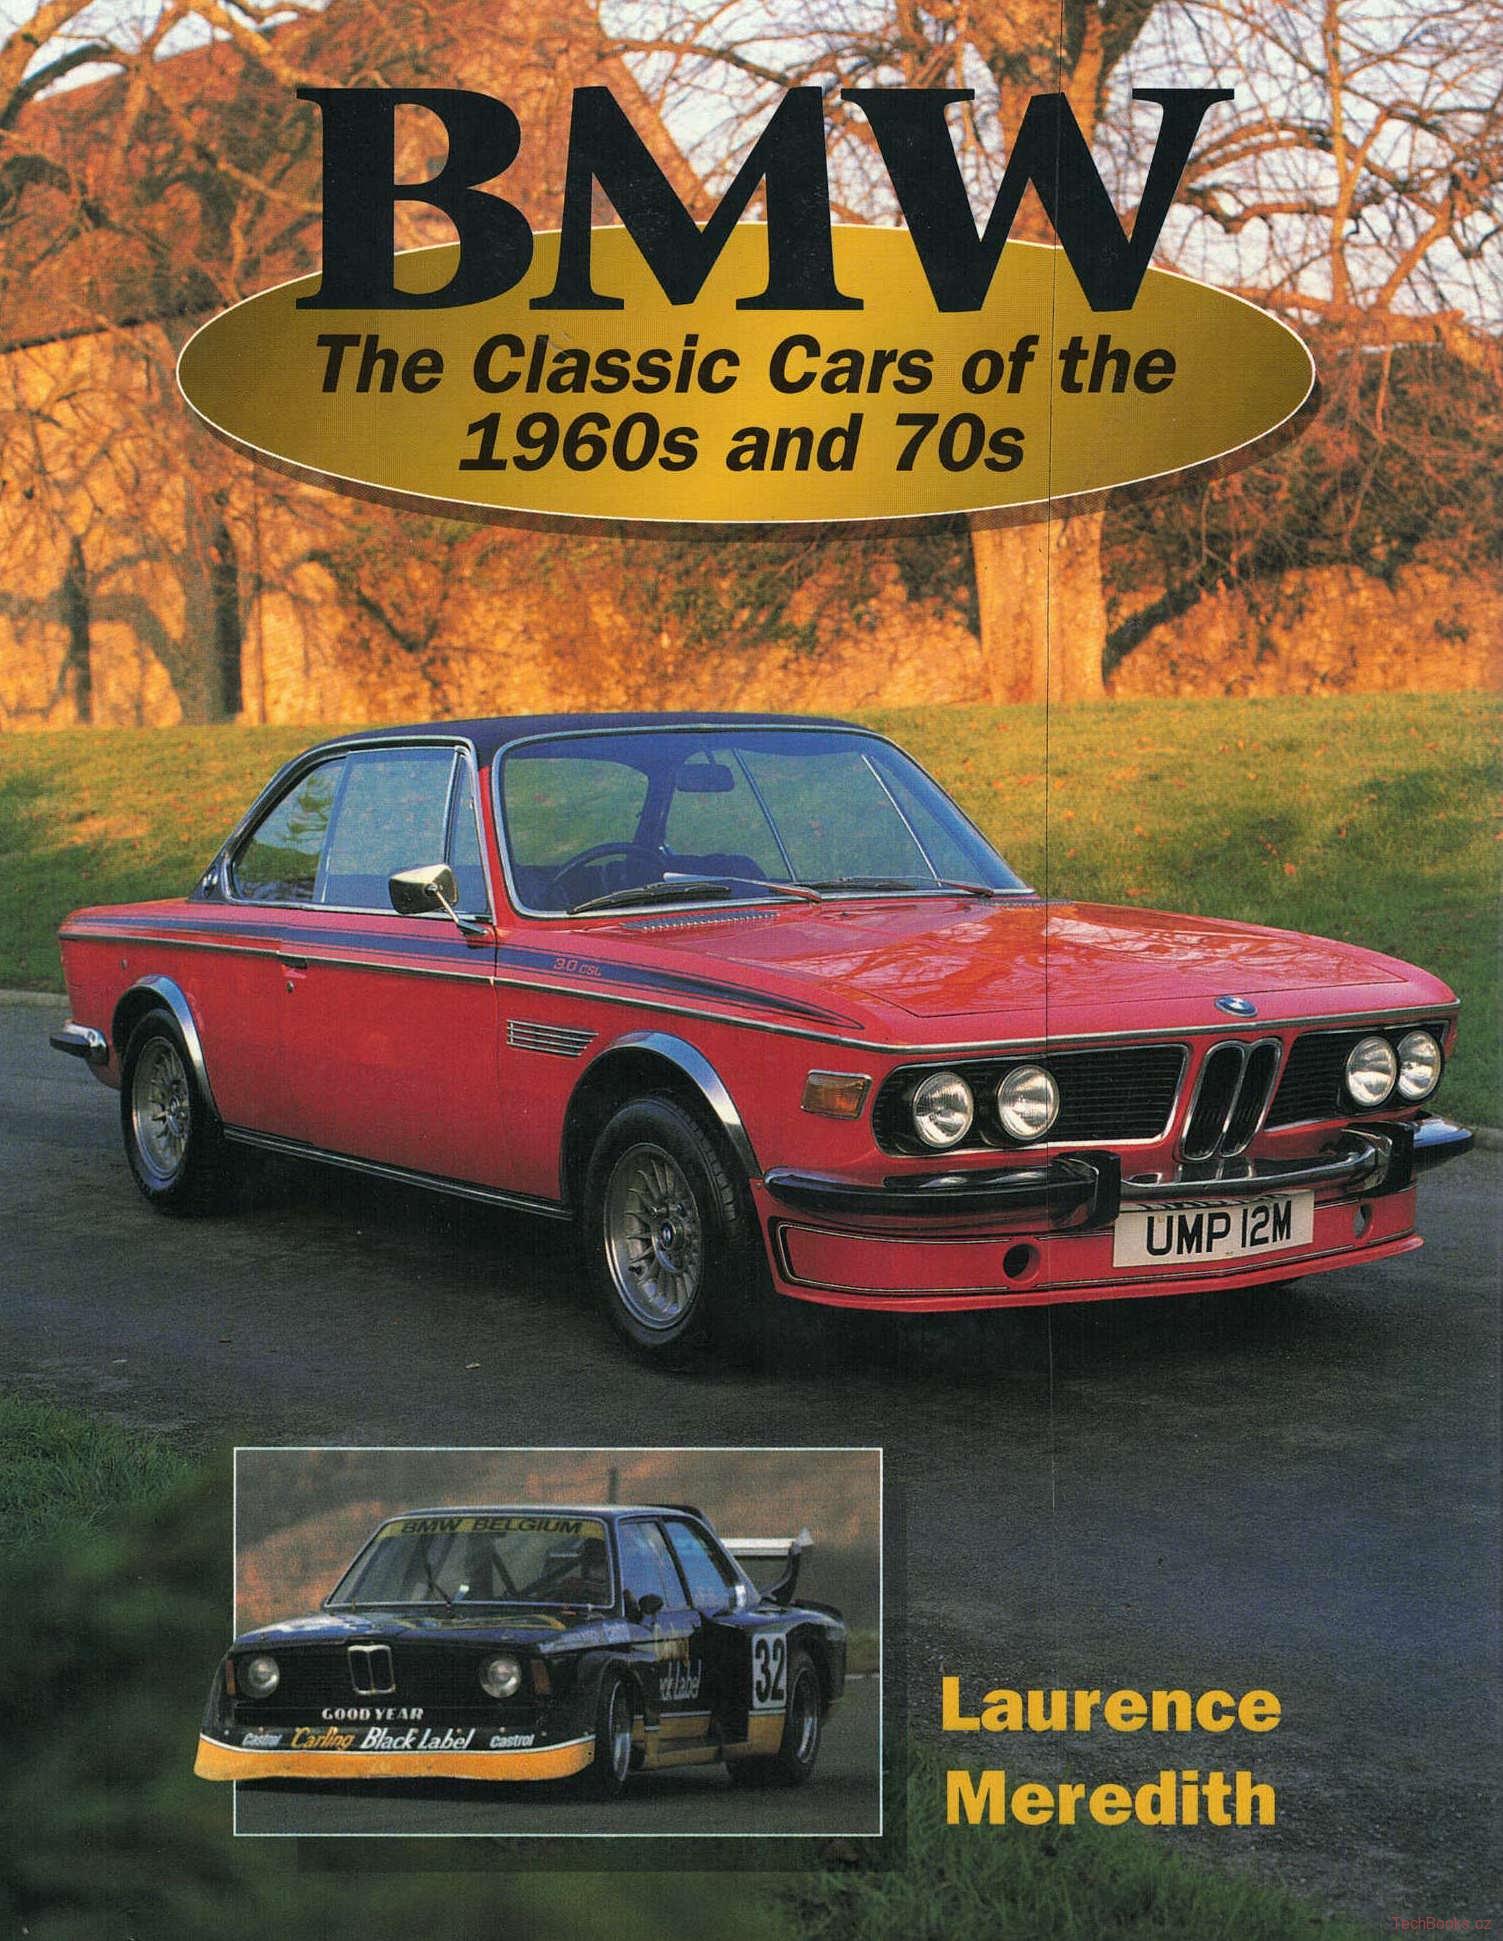 BMW - The Classic Cars of the 1960s and 70s